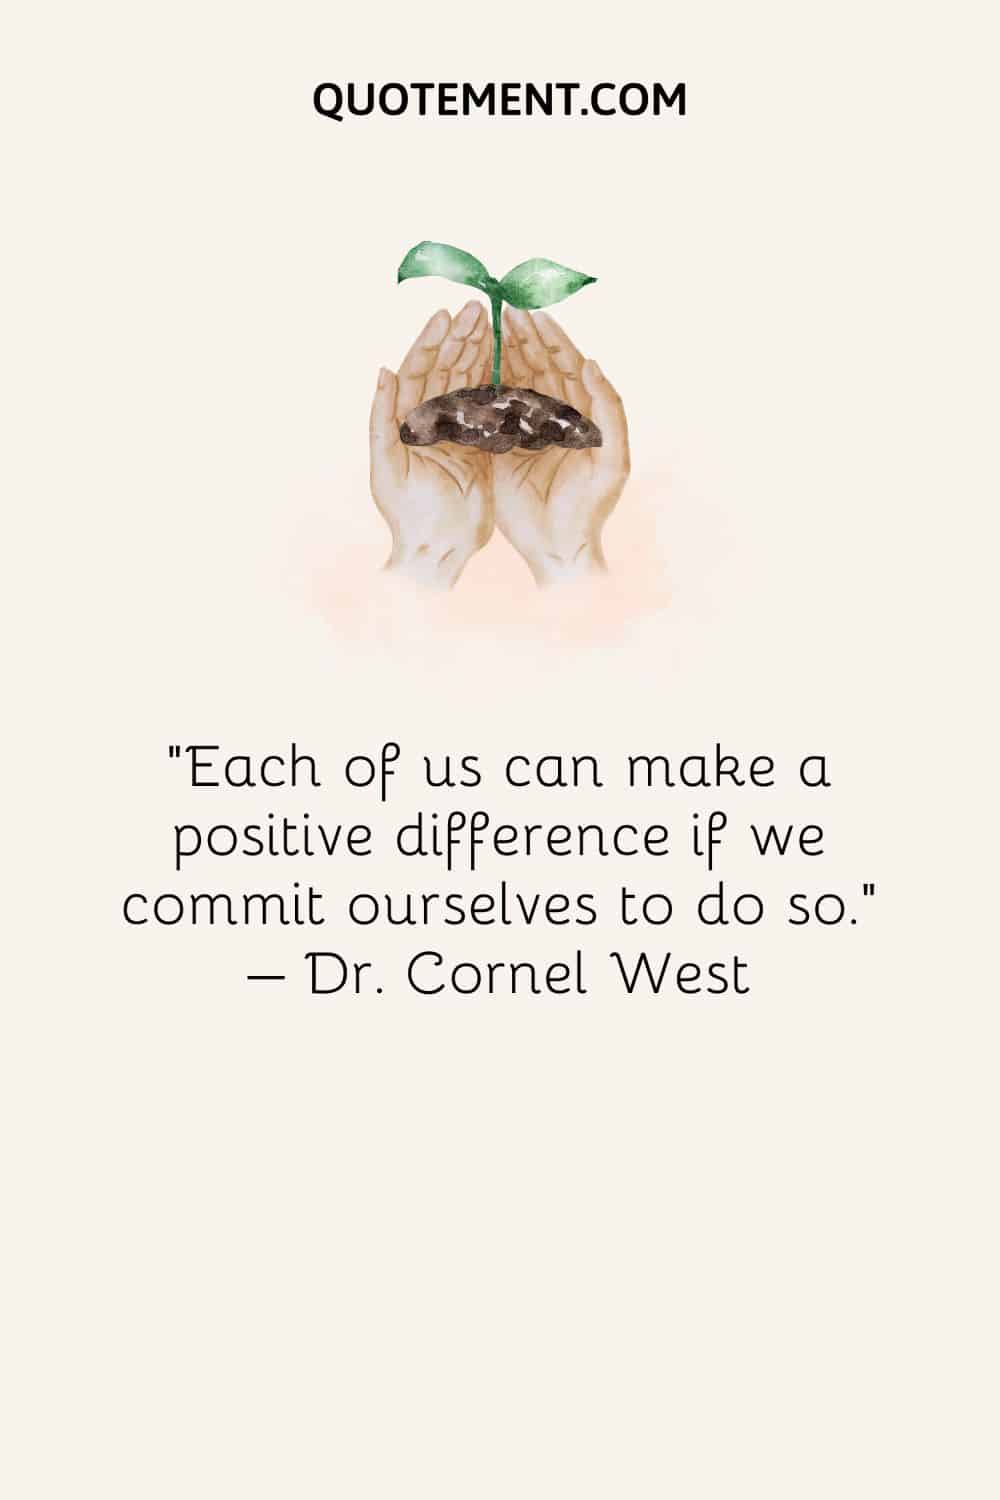 Each of us can make a positive difference if we commit ourselves to do so - dr. Cornell West